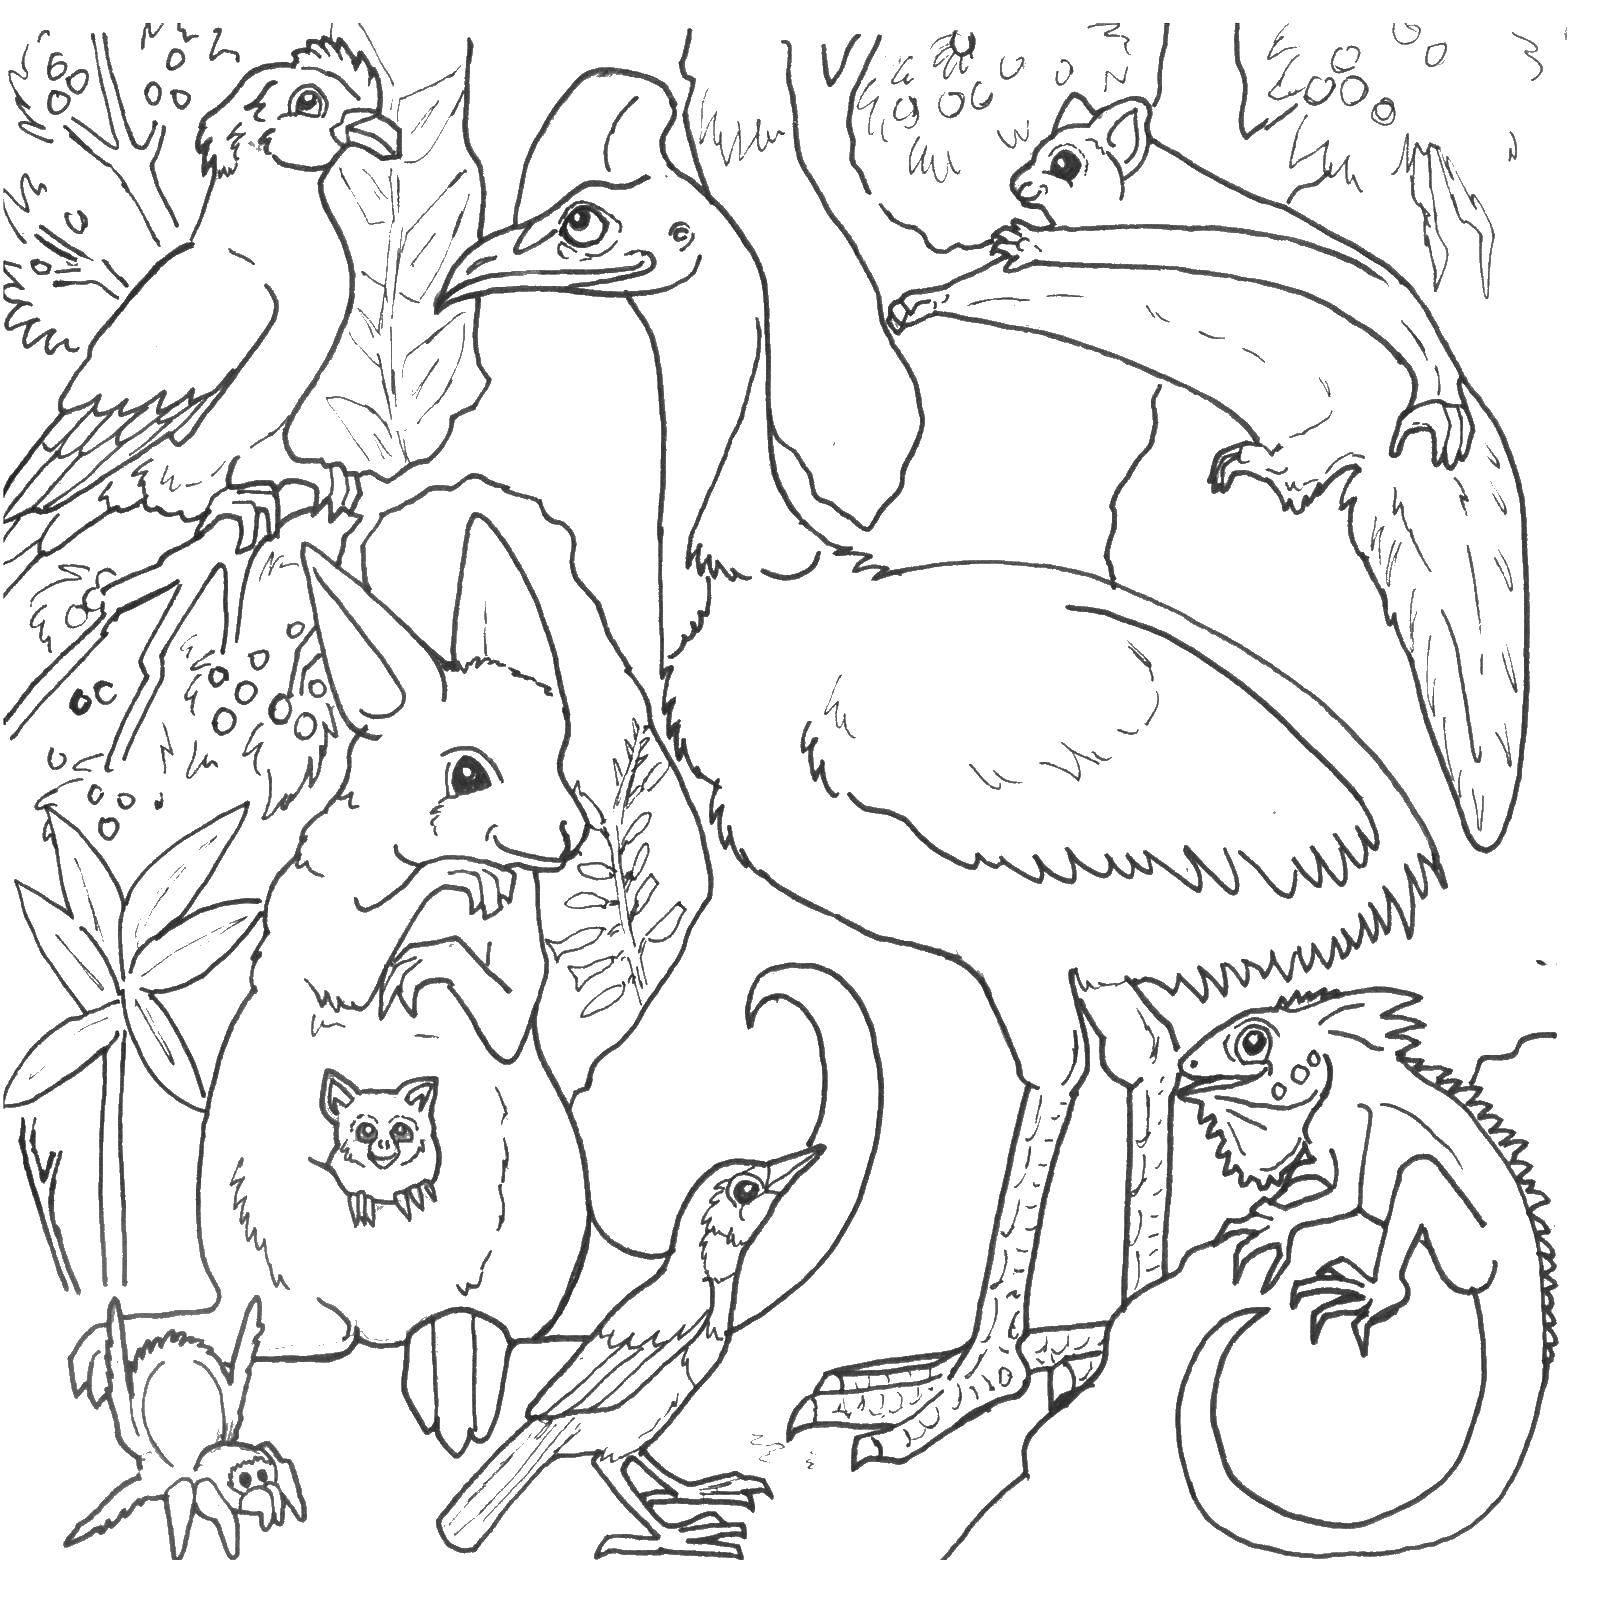 Coloring Different forest animals. Category Animals. Tags:  animals, animals, forest.